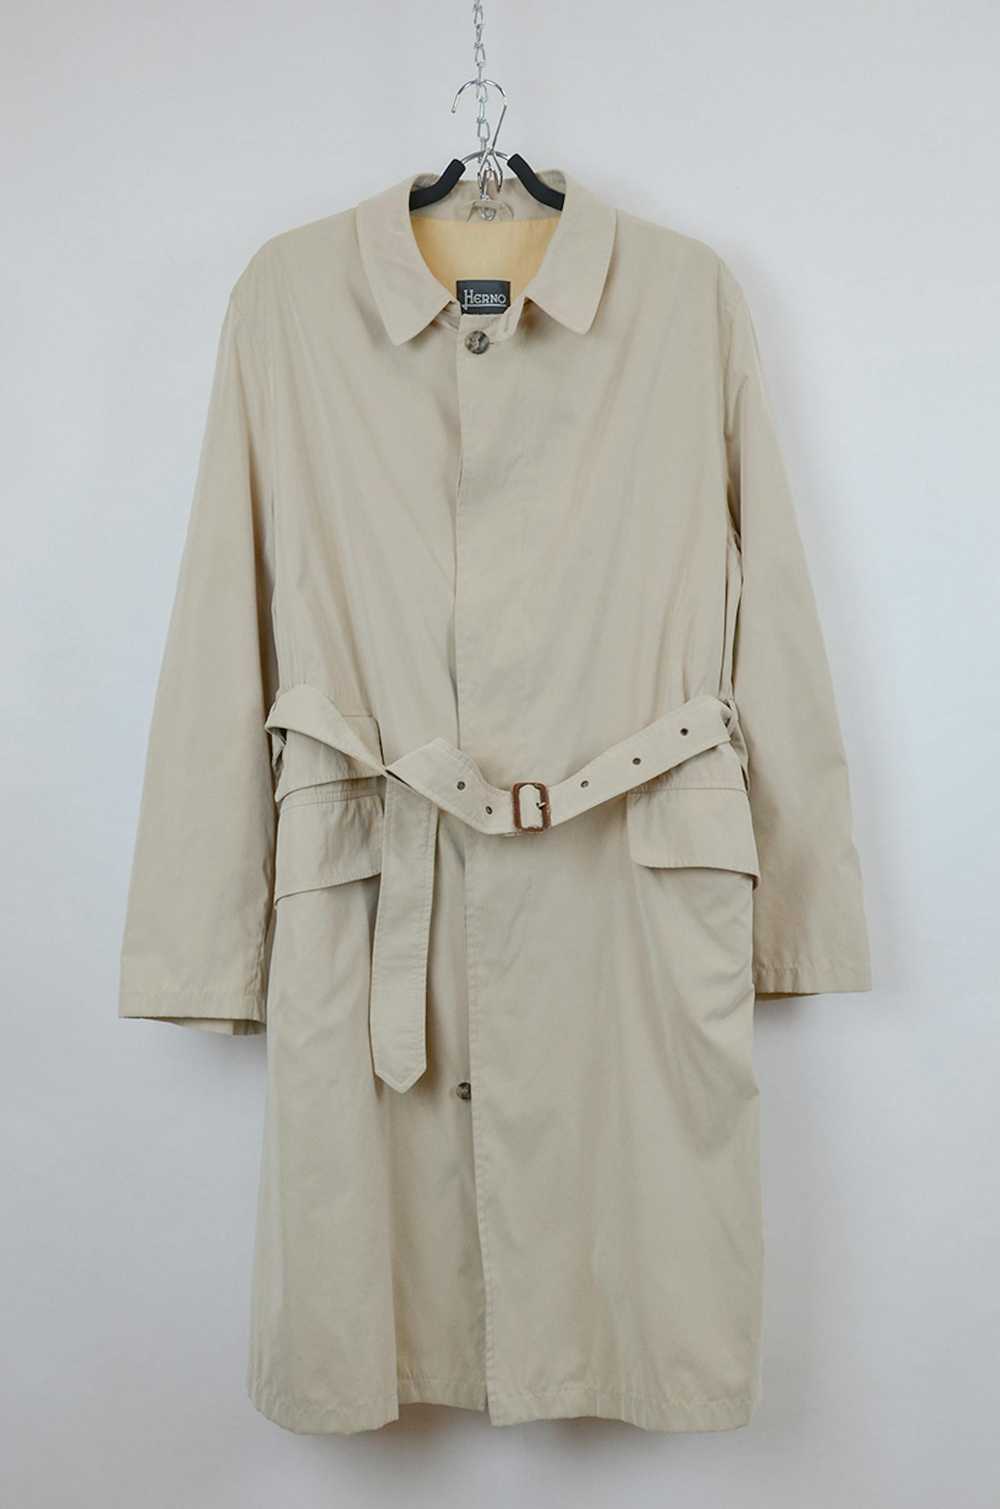 Herno HERNO Perfect Light Trench Coat - image 1